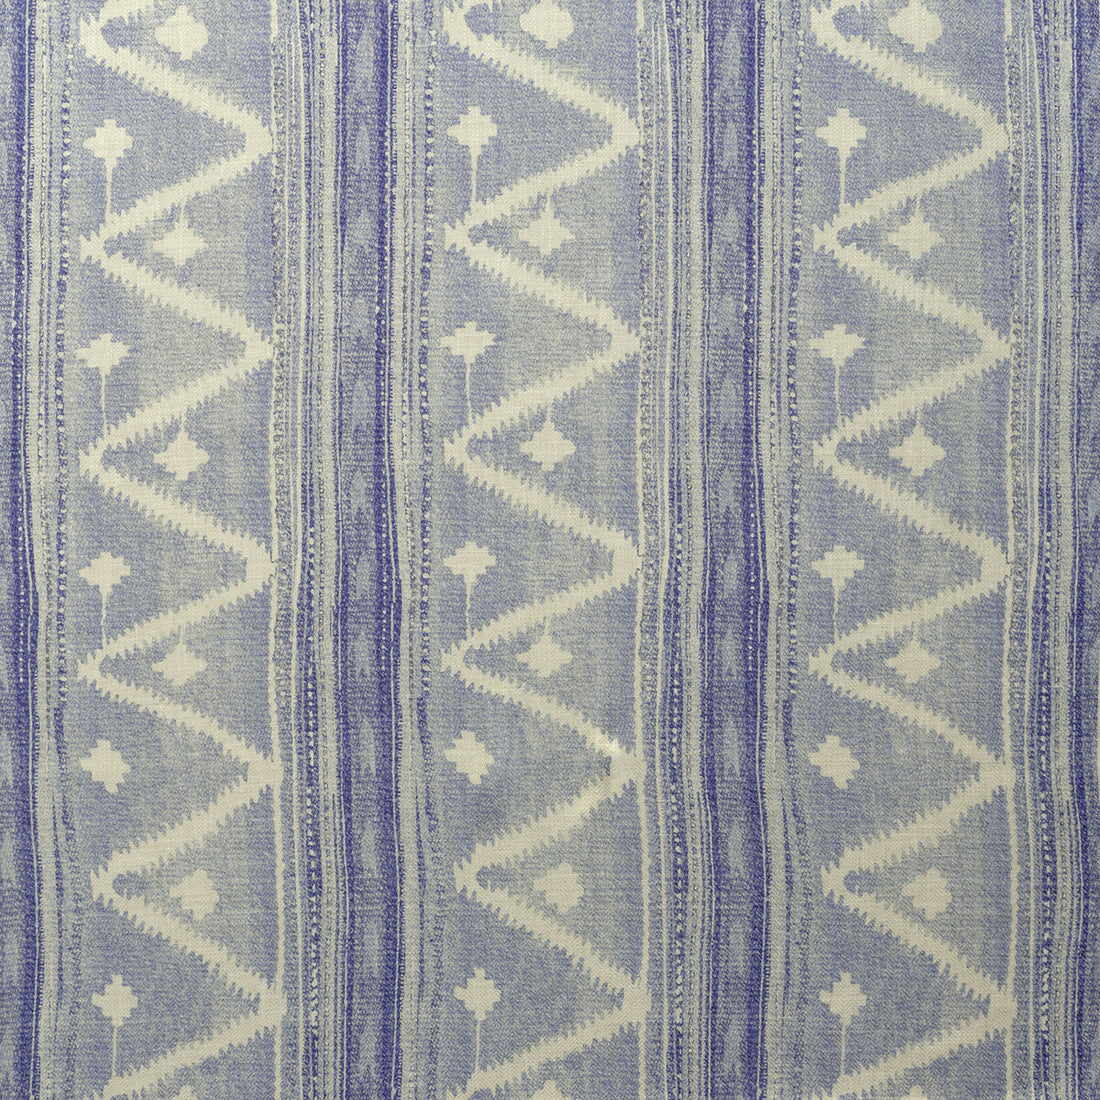 Babylon fabric in denim color - pattern AM100340.5.0 - by Kravet Couture in the Andrew Martin Hindukush collection